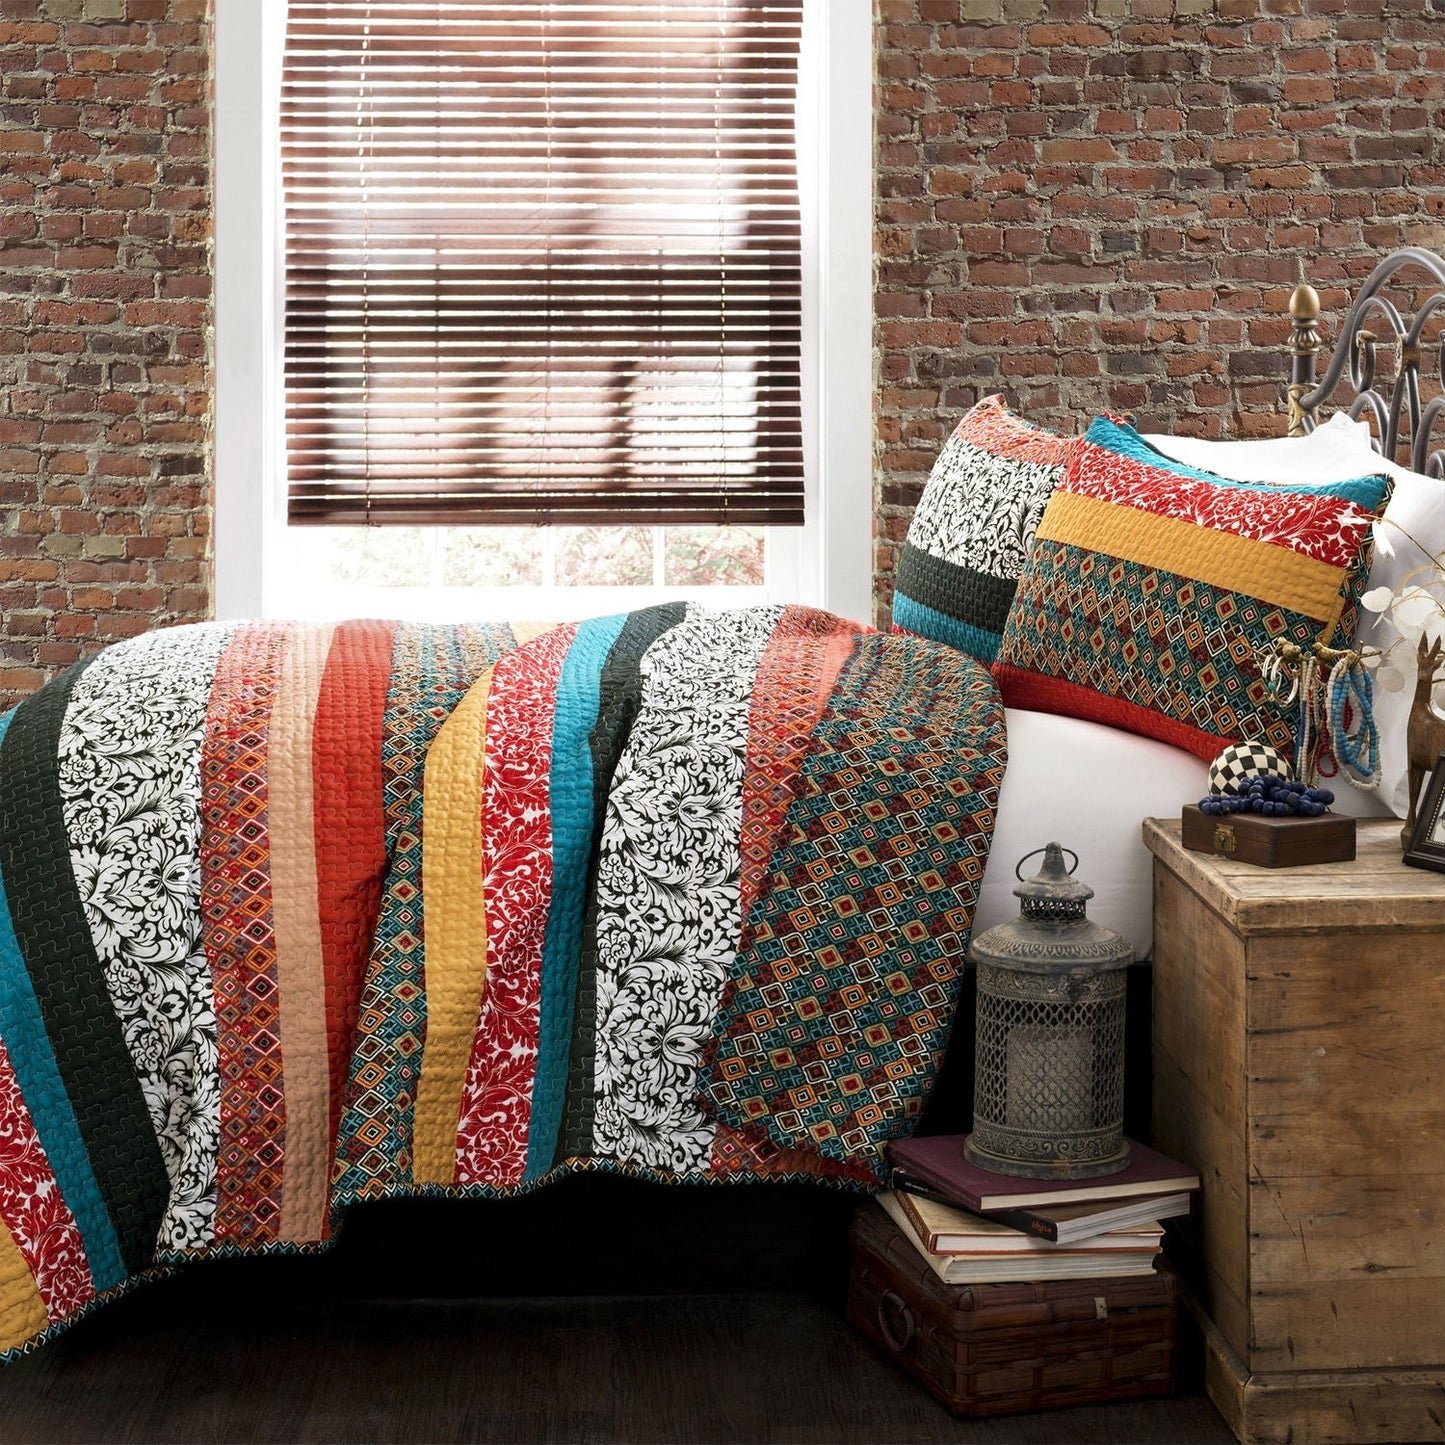 Bedroom > Quilts & Blankets - King Size 3-Piece Quilt Set In Modern Colorful Stripe Geometric Floral Pattern